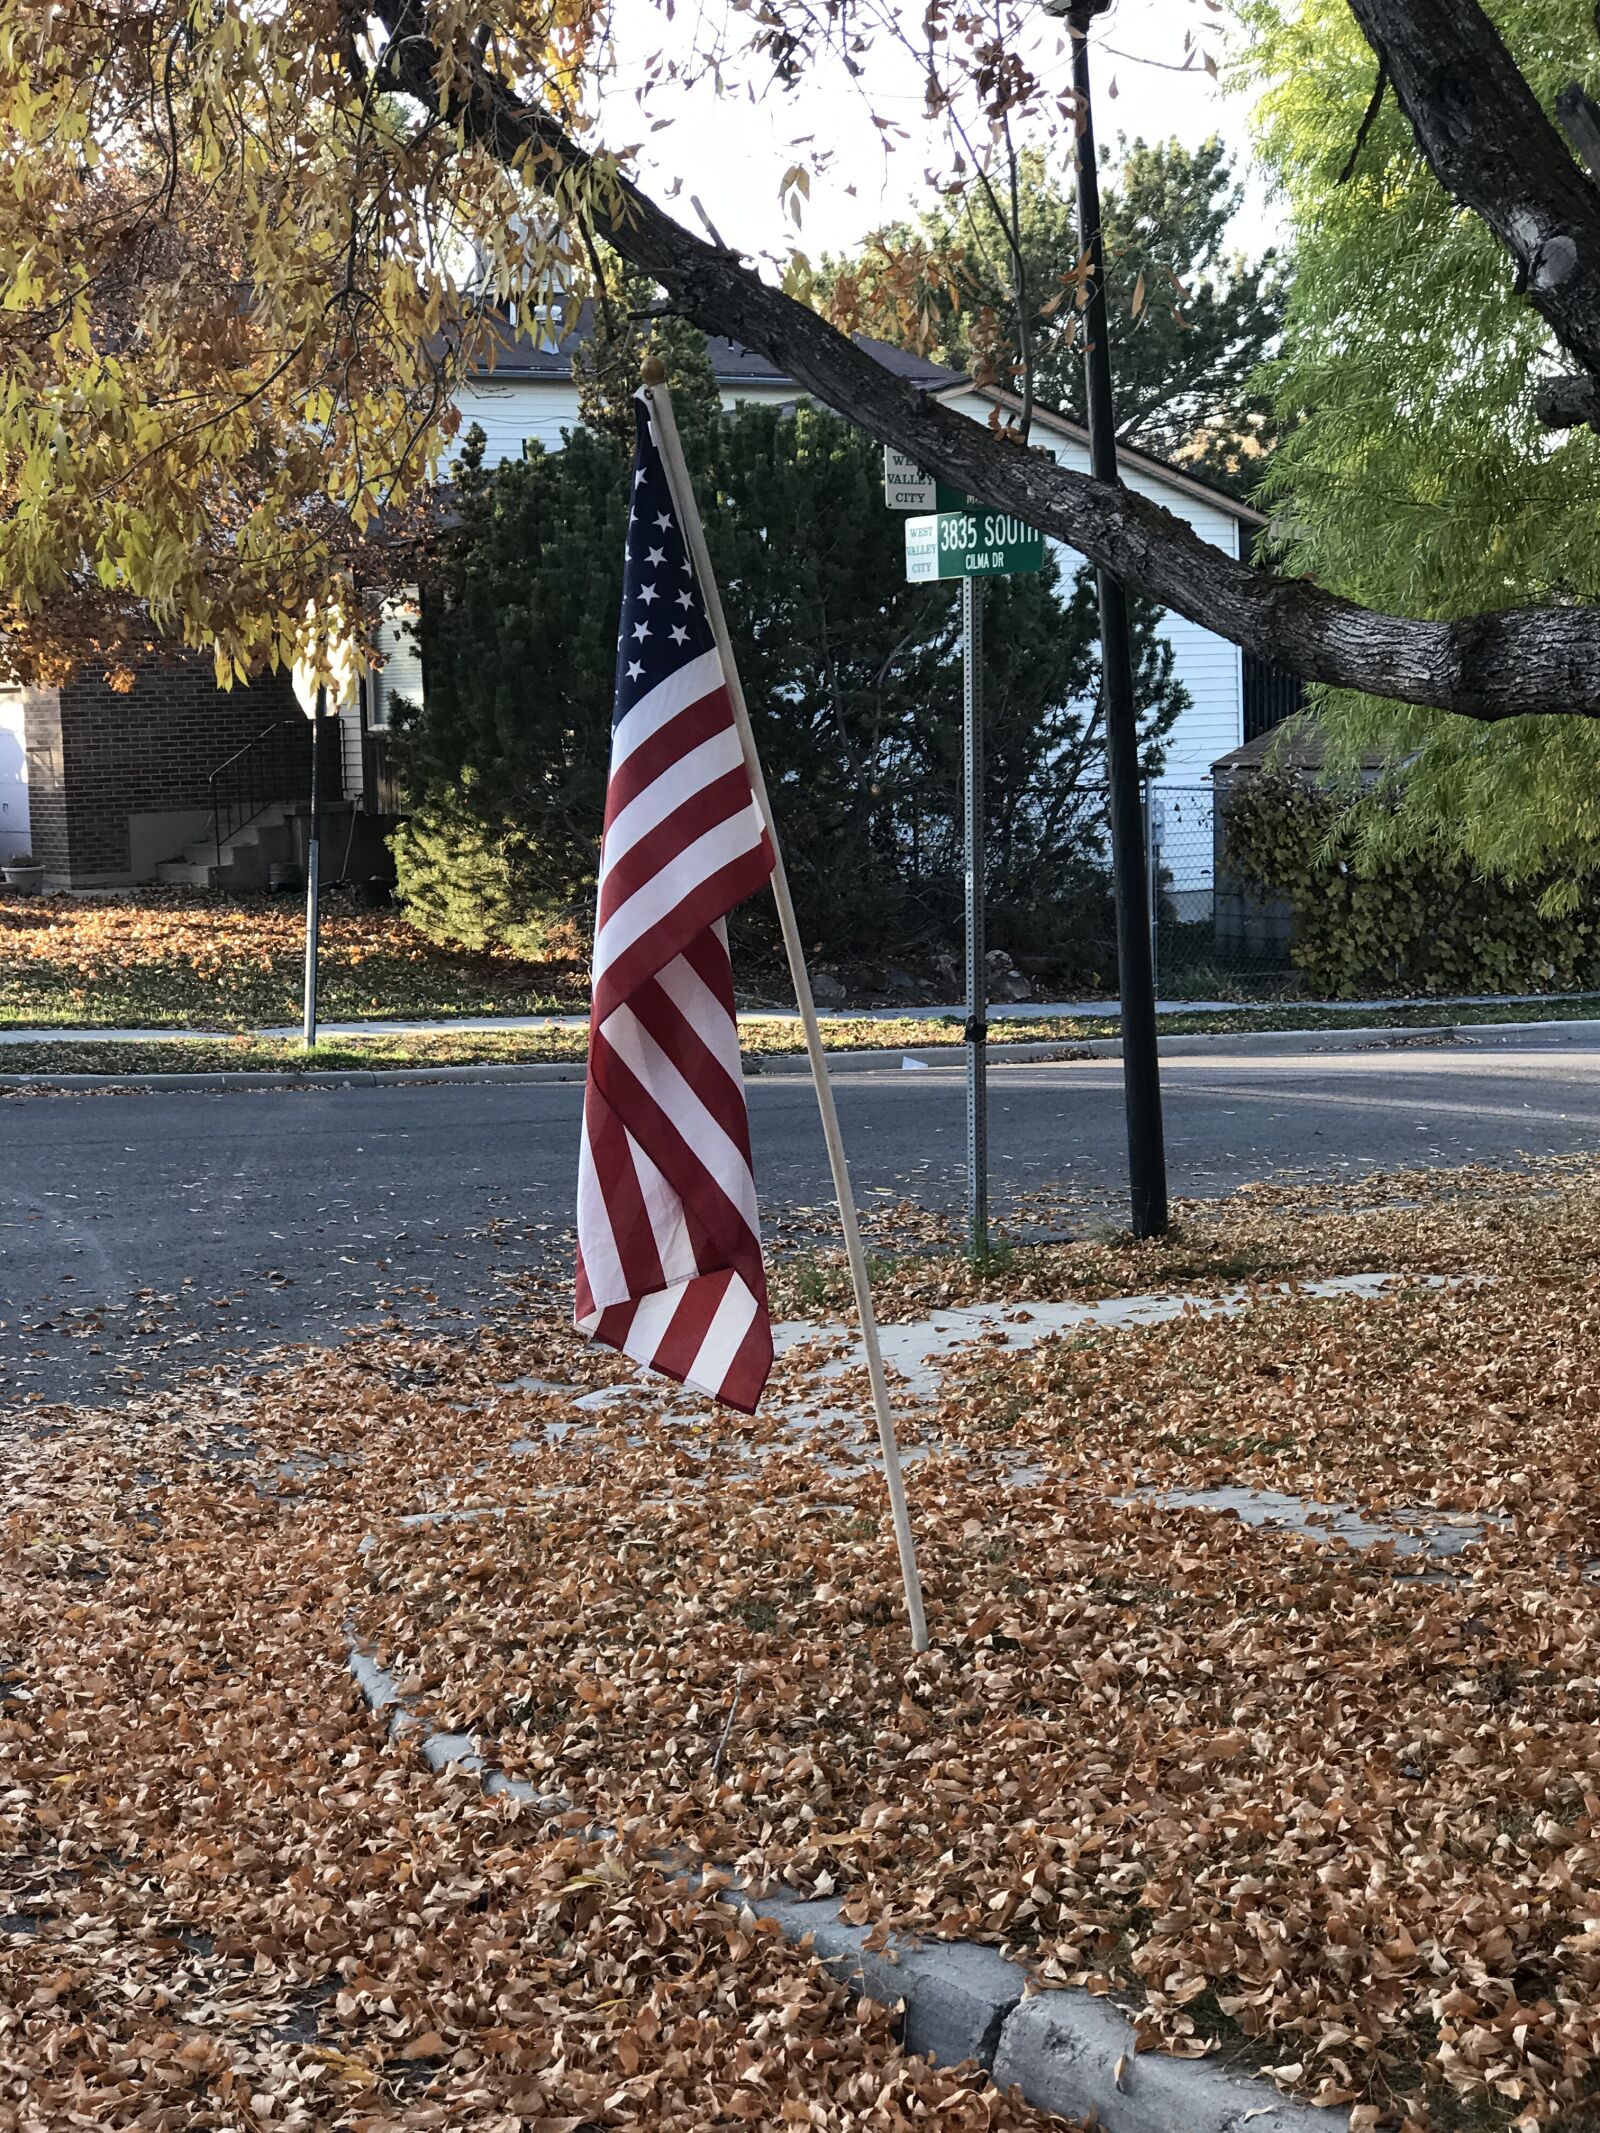 iPhone 7 Plus back iSight Duo camera 6.6mm f/2.8 sample photo. American, flag, leaves photography